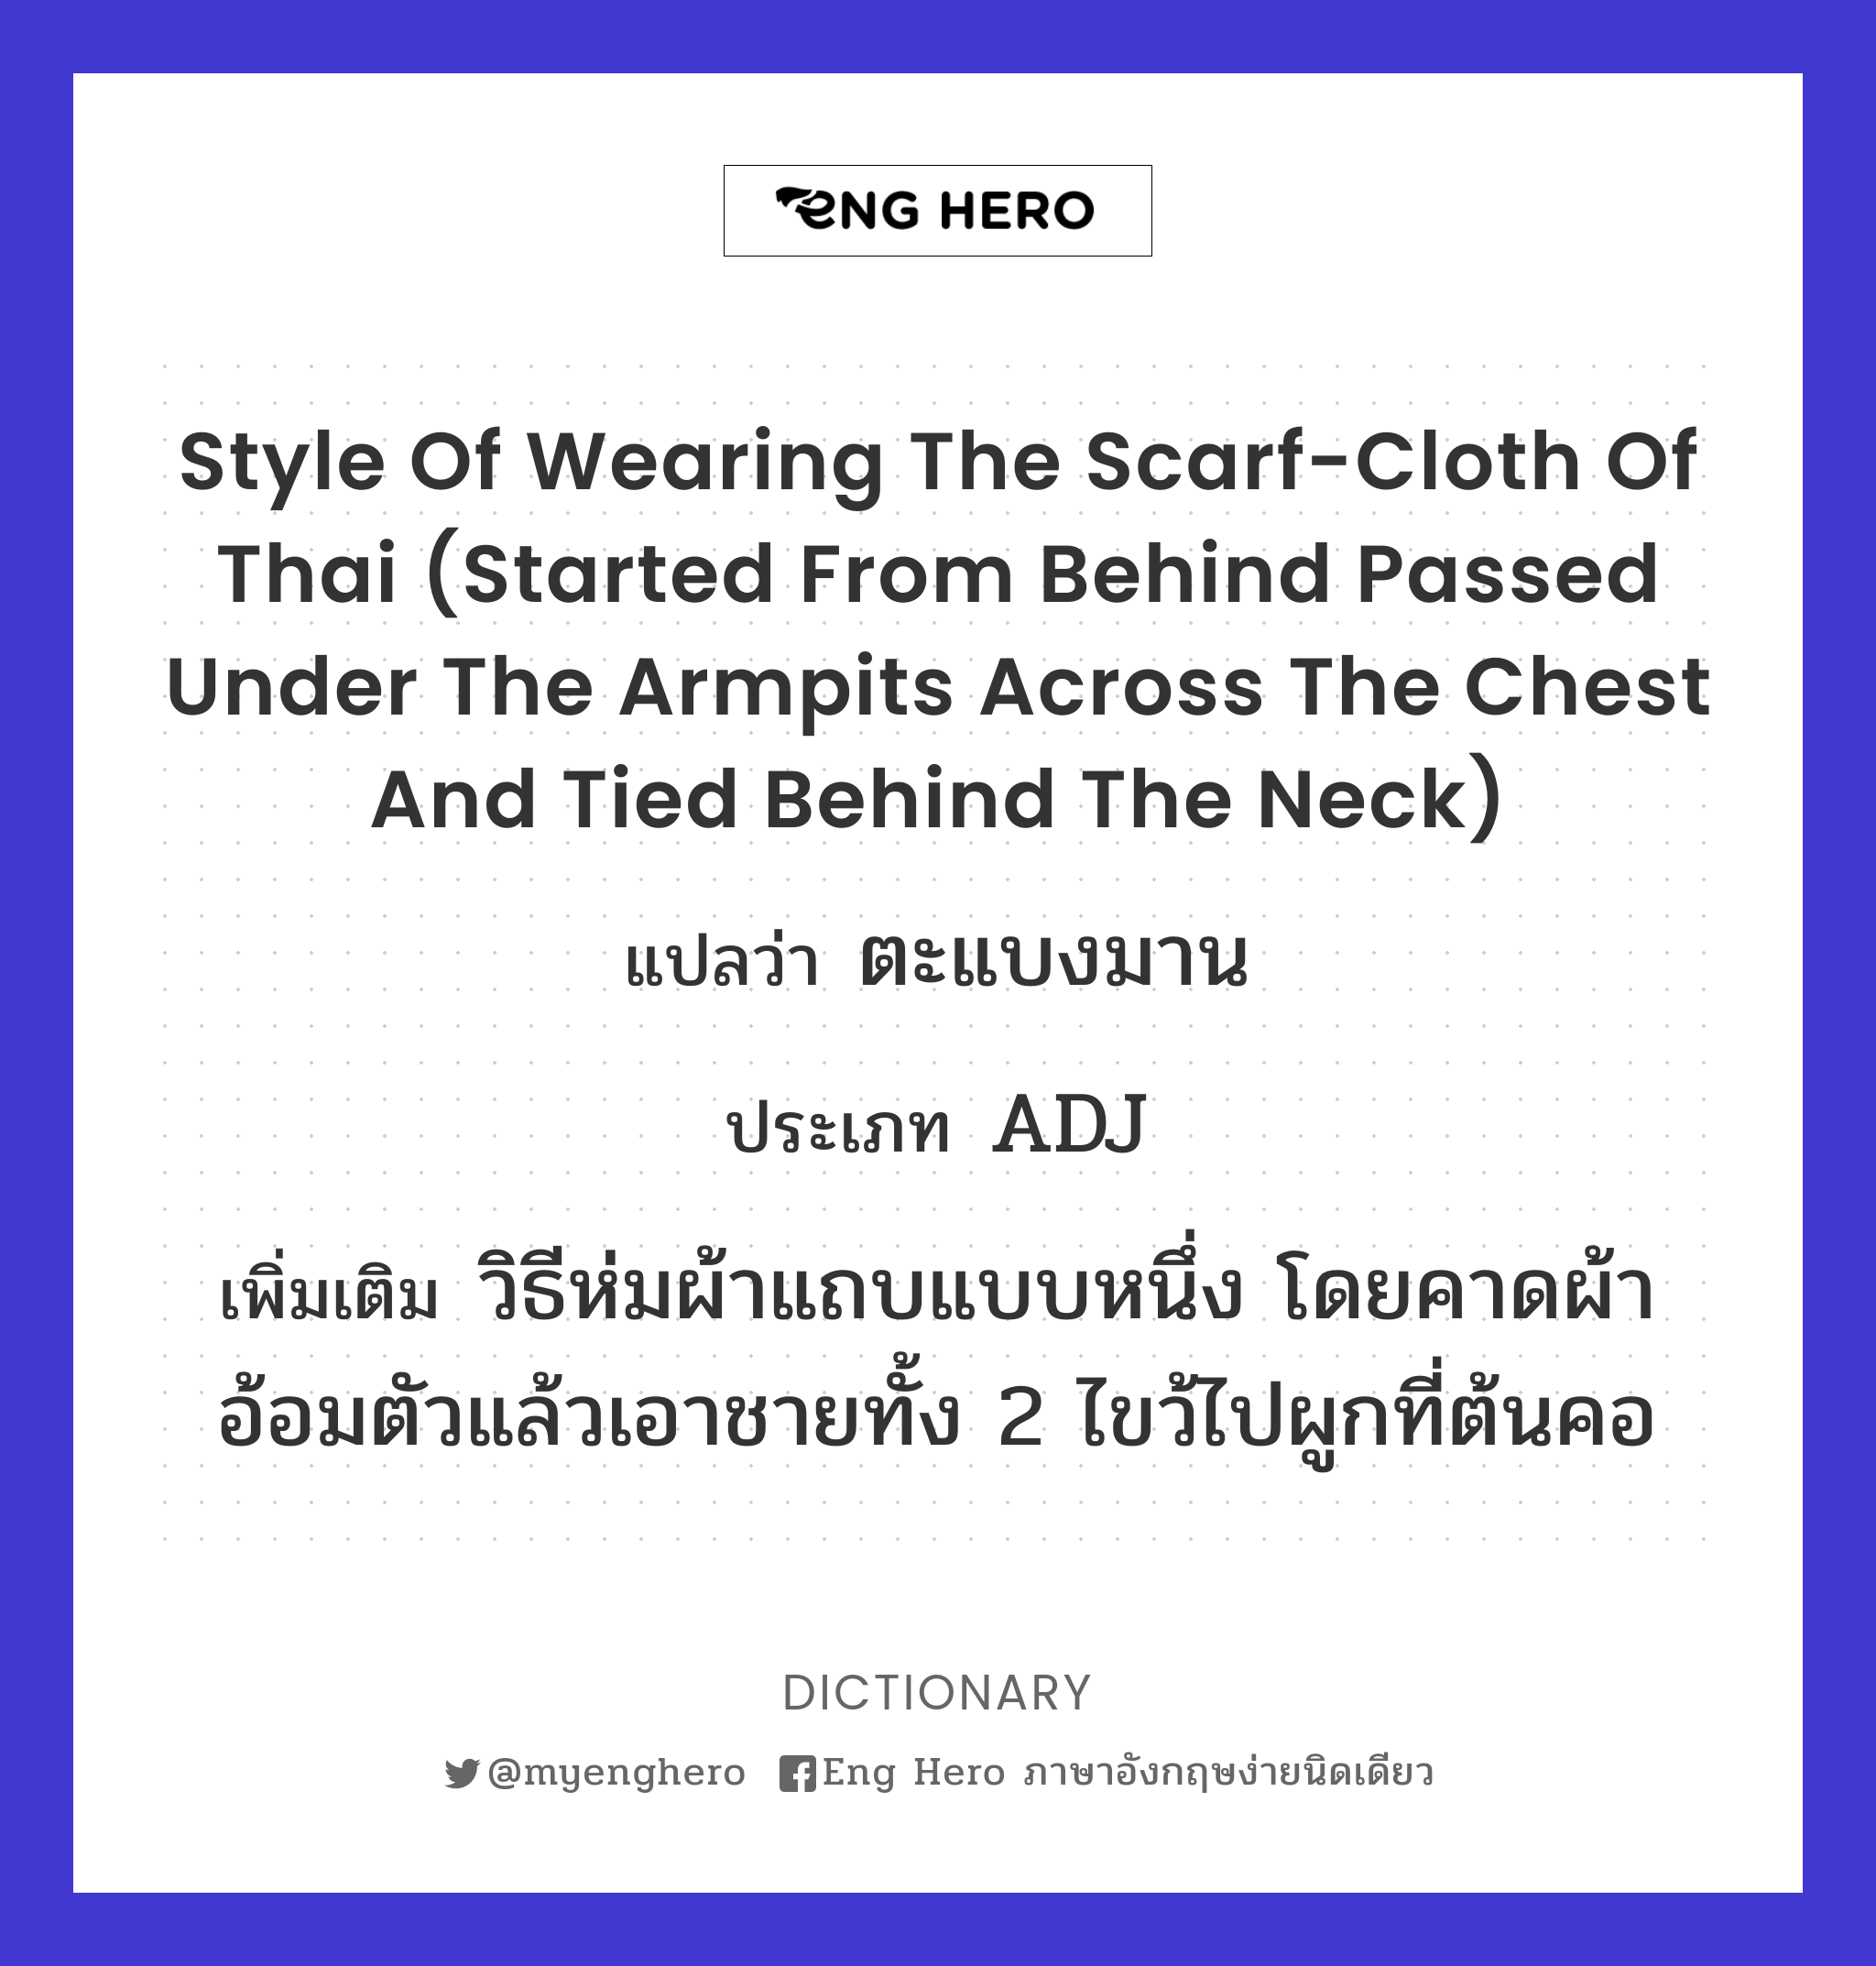 style of wearing the scarf-cloth of Thai (started from behind passed under the armpits across the chest and tied behind the neck)